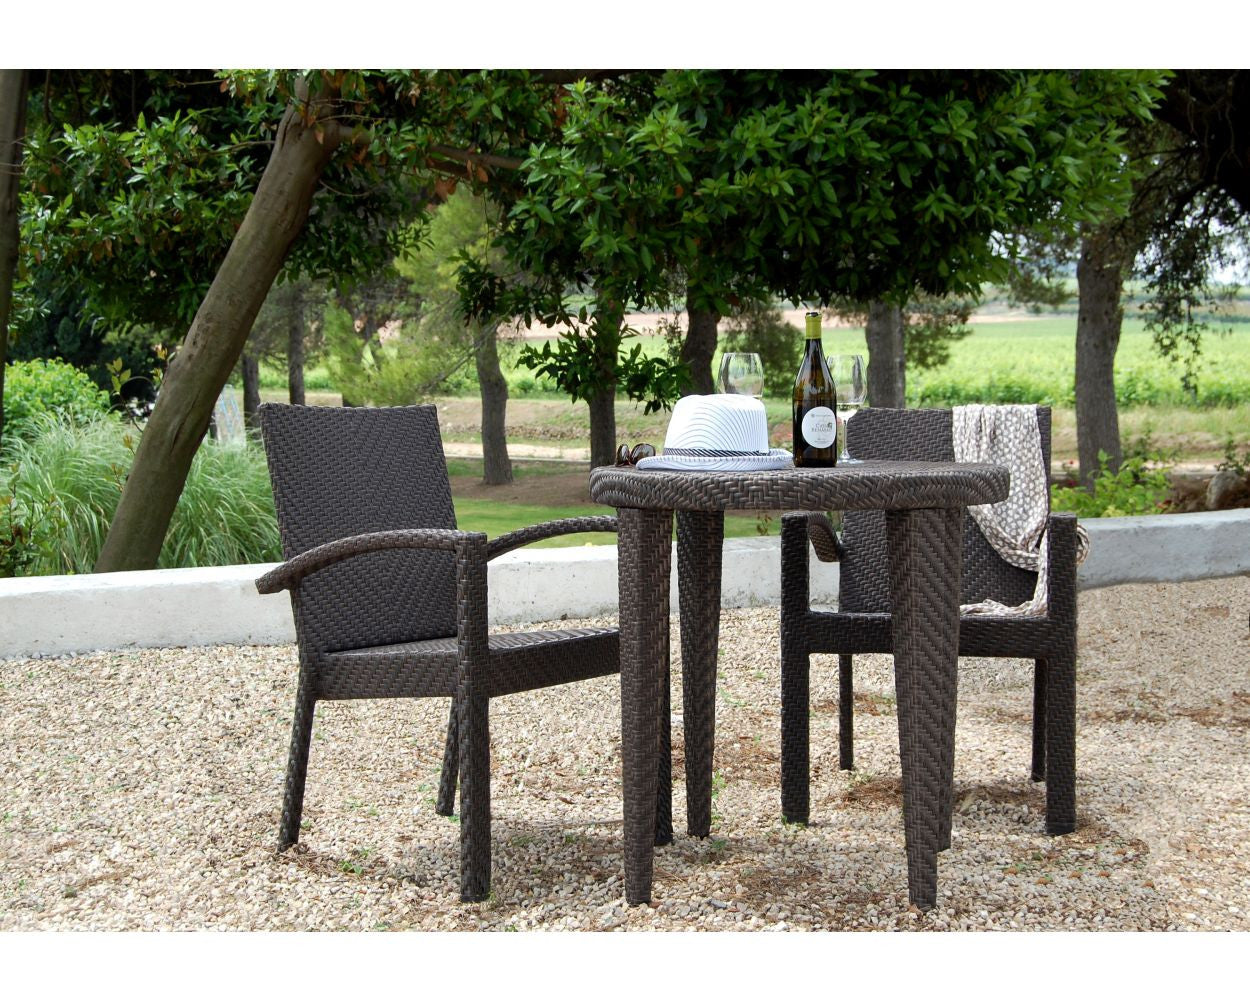 Hospitality Rattan Soho 3 PC Dining Arm Chair Bistro Group with Cushions